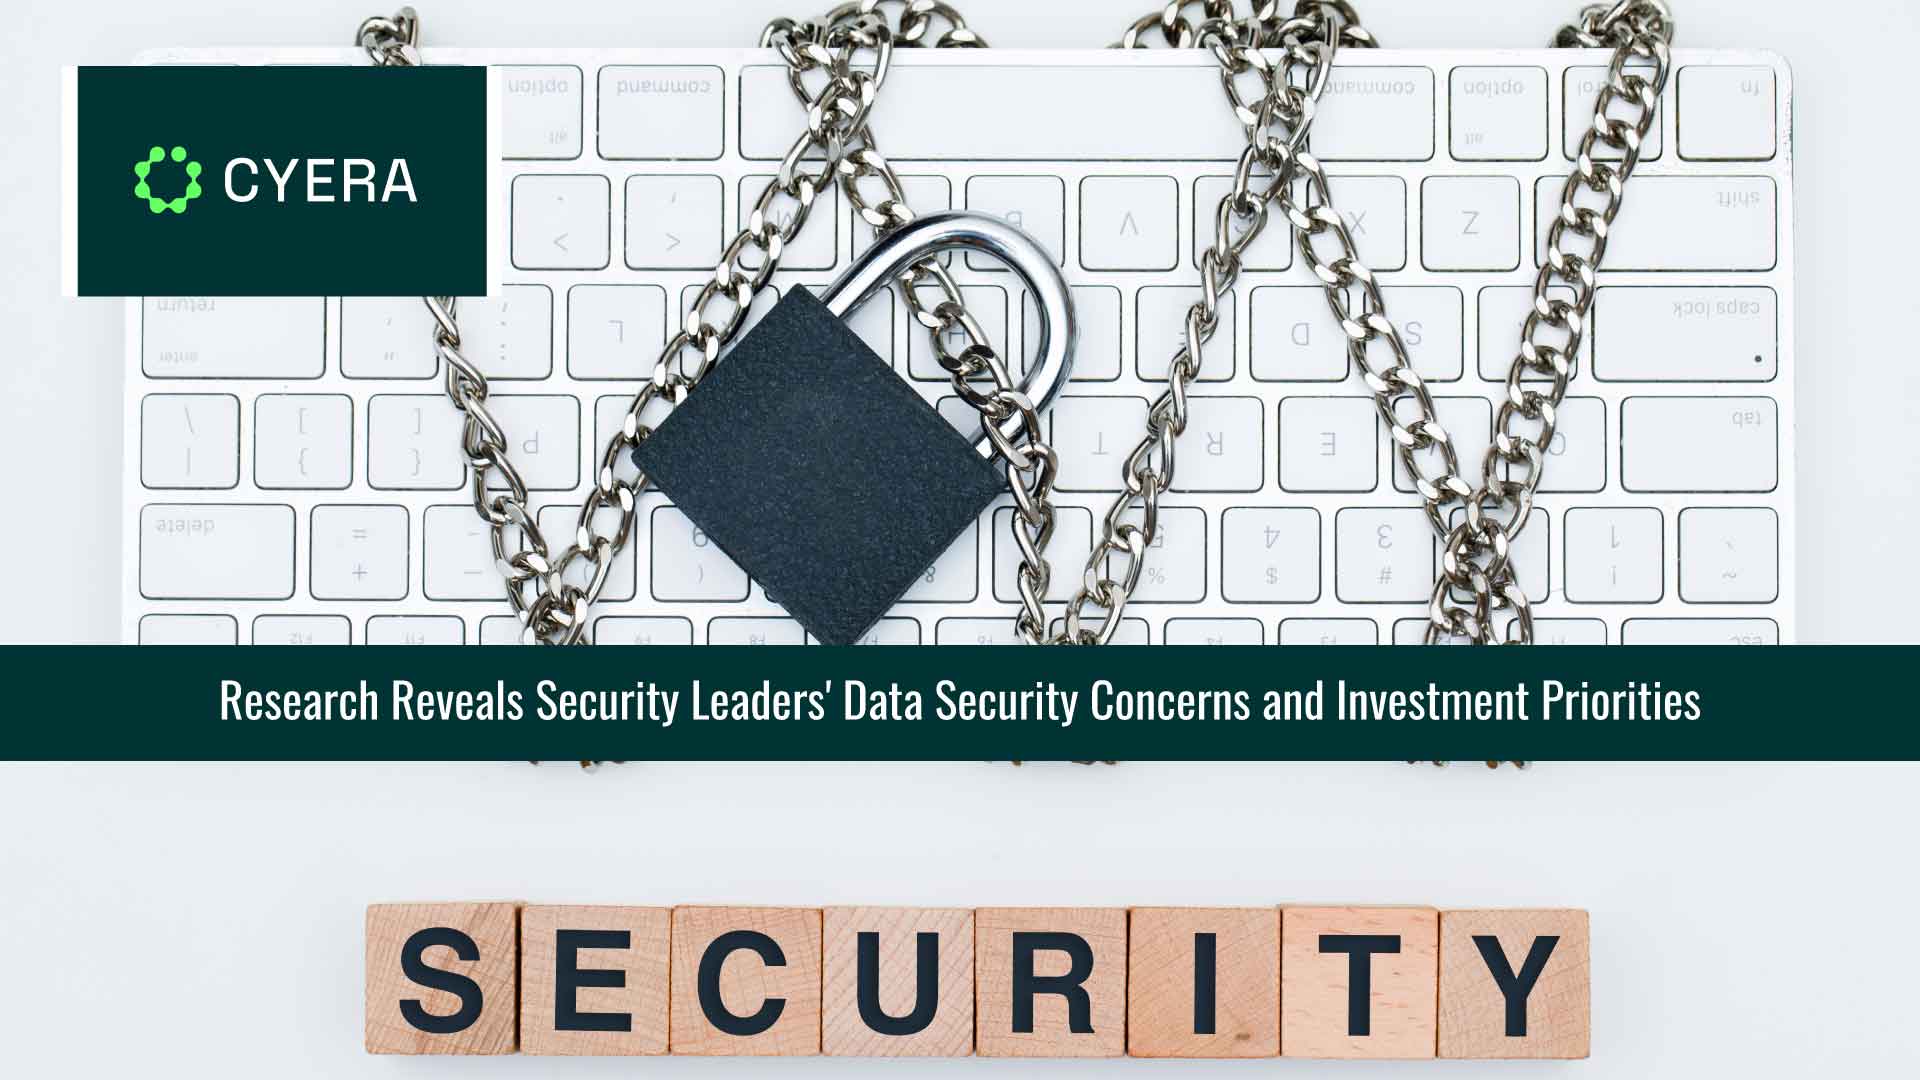 Cyera Research Reveals Security Leaders' Data Security Concerns and Investment Priorities